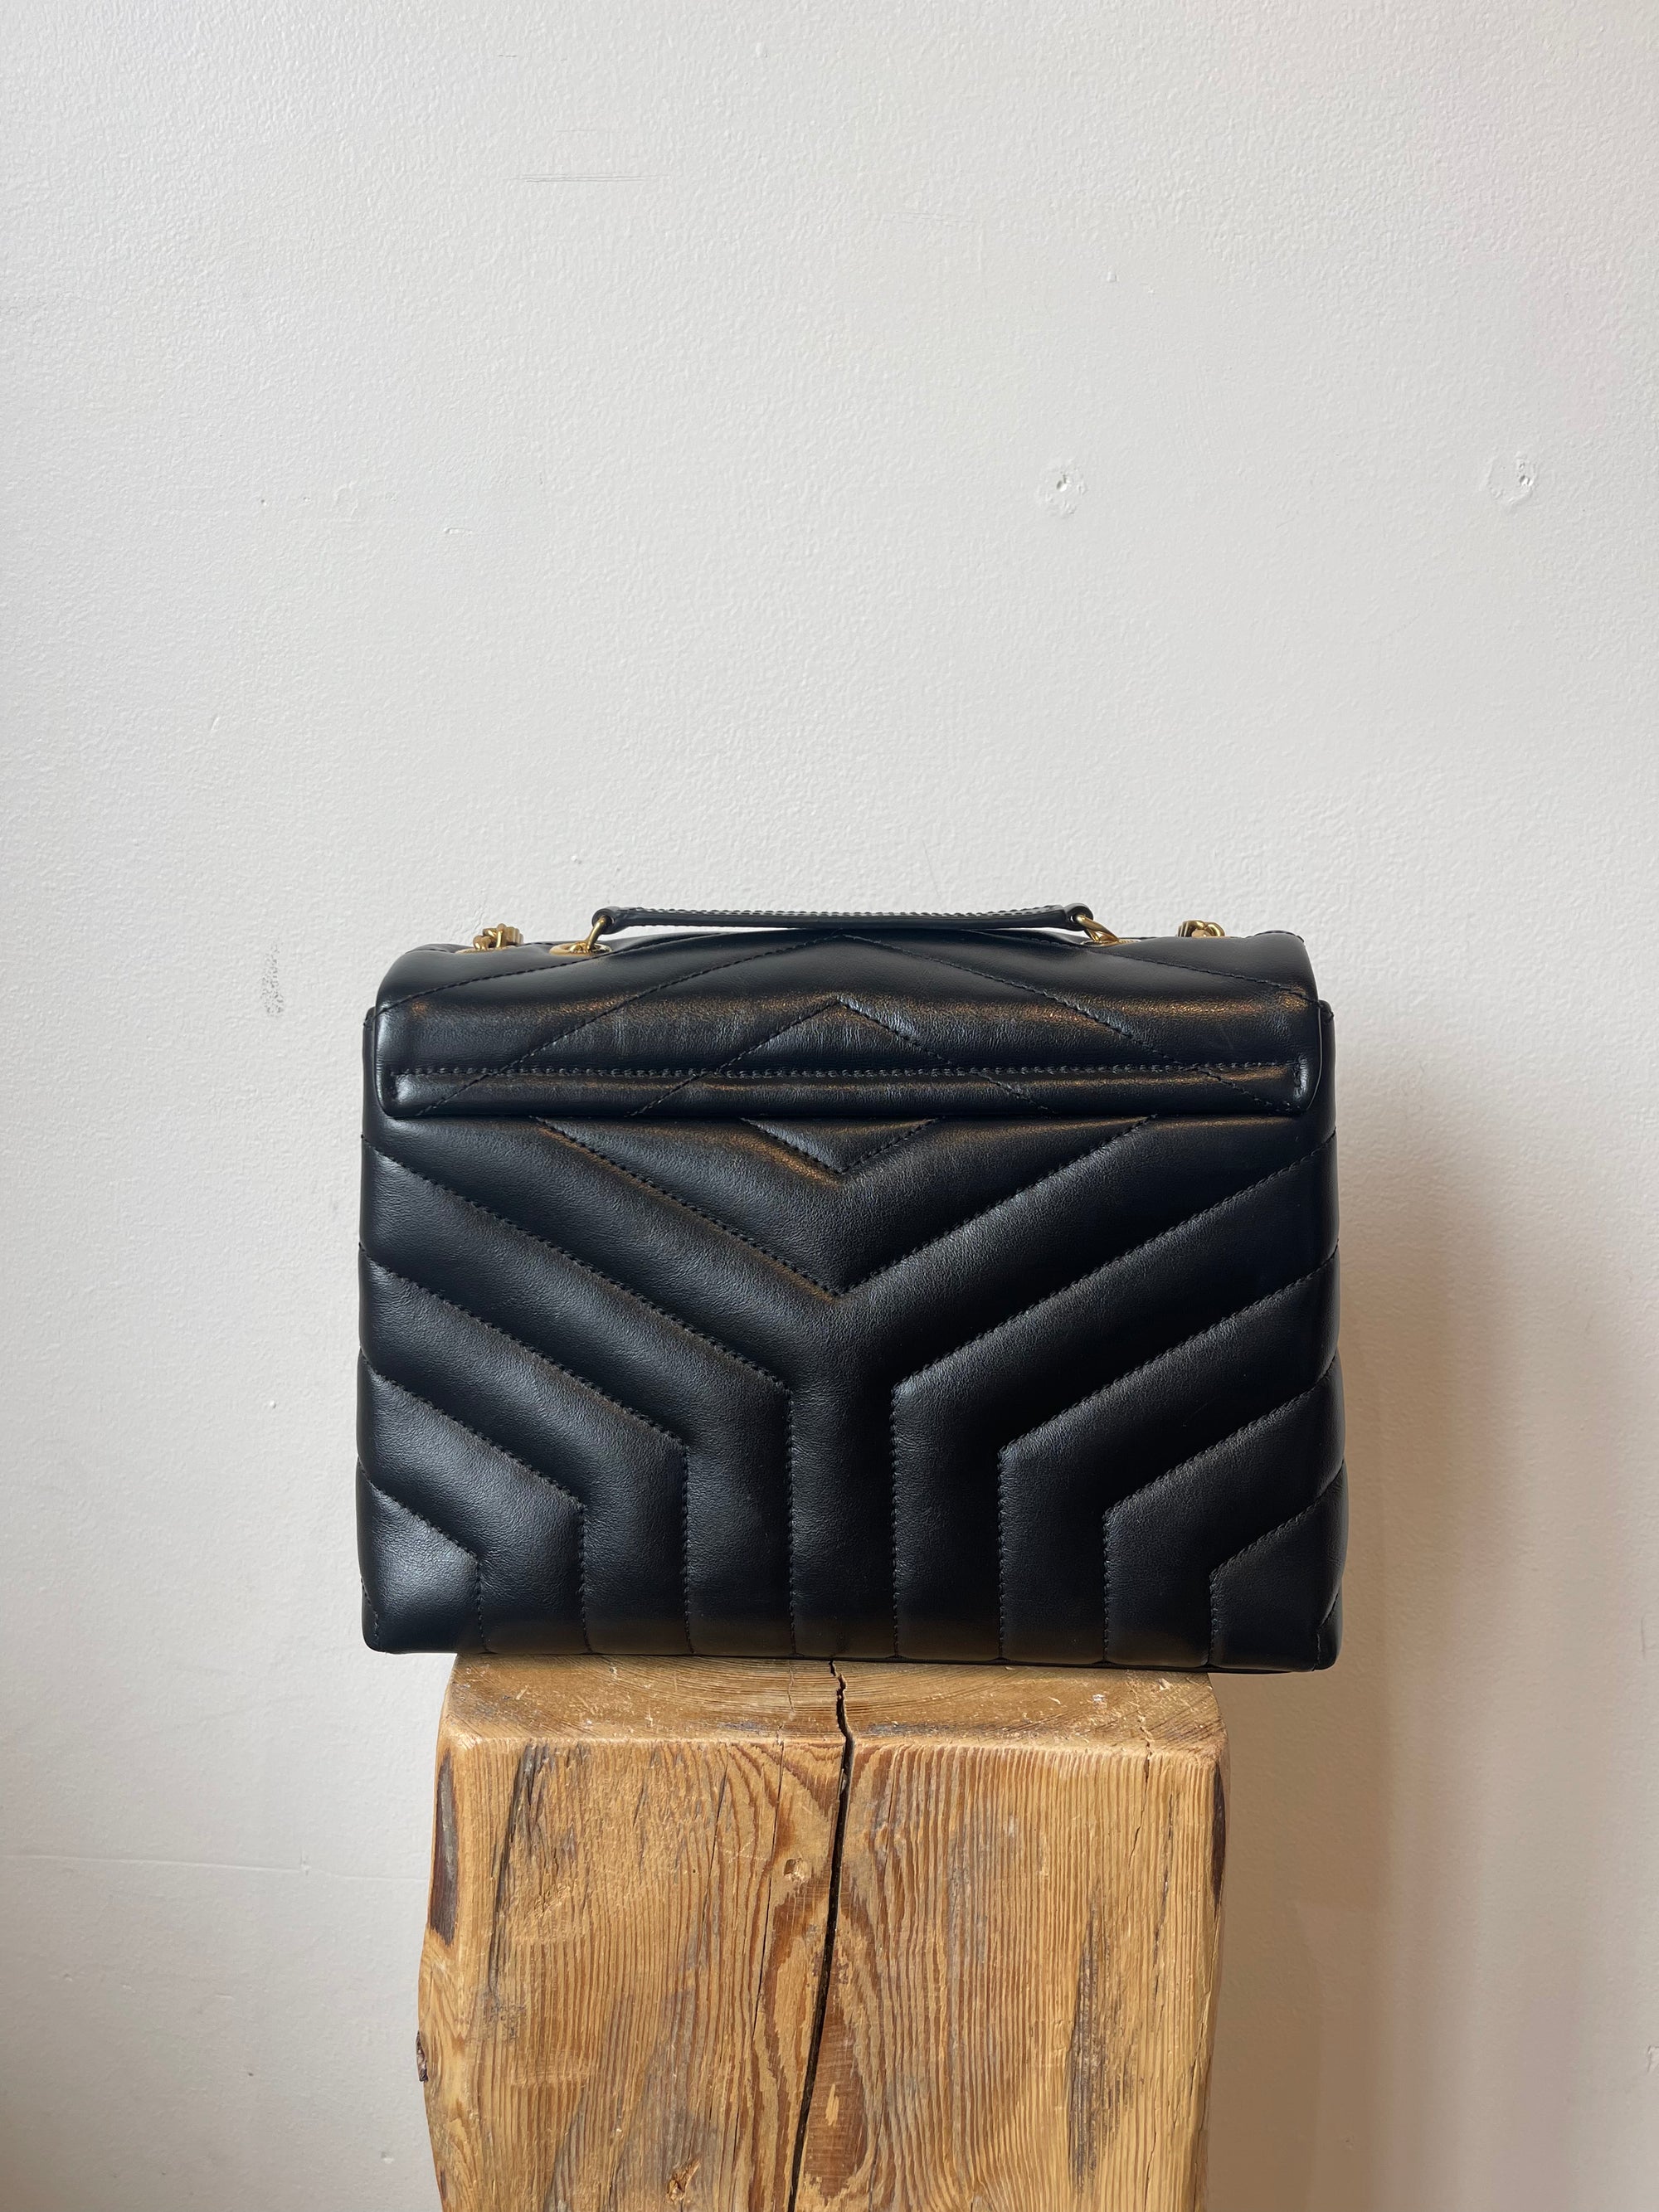 Yves Saint Laurent, Small Lou Lou Handbag in Black Quilted Leather